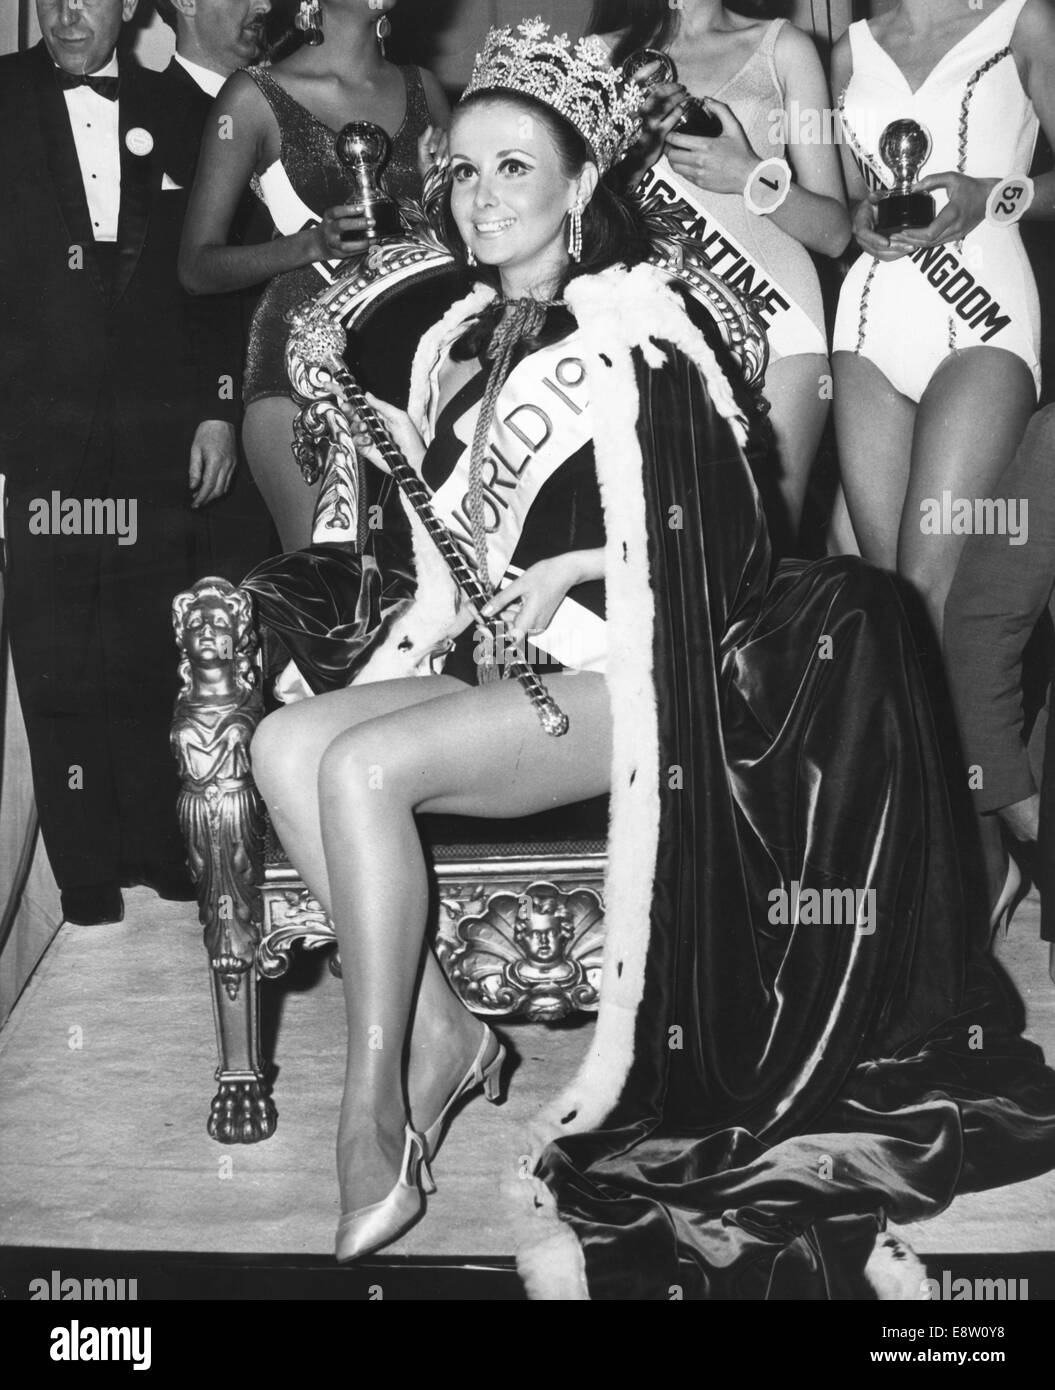 London, UK, UK. 16th Nov, 1967. MADELEINE HARTOG-BEL, 21-year-old Miss Peru, is crowned Miss World 1967 at the Lyceum Ballroom in London. After making it to the semi-finals of the Miss Universe pageant in 1966, she went on to win the Miss World title in London, UK the following year. After Miss World, she lived in Paris, France for many years, and now she resides in a South Florida island. She is married and has a daughter. © KEYSTONE Pictures/ZUMA Wire/ZUMAPRESS.com/Alamy Live News Stock Photo